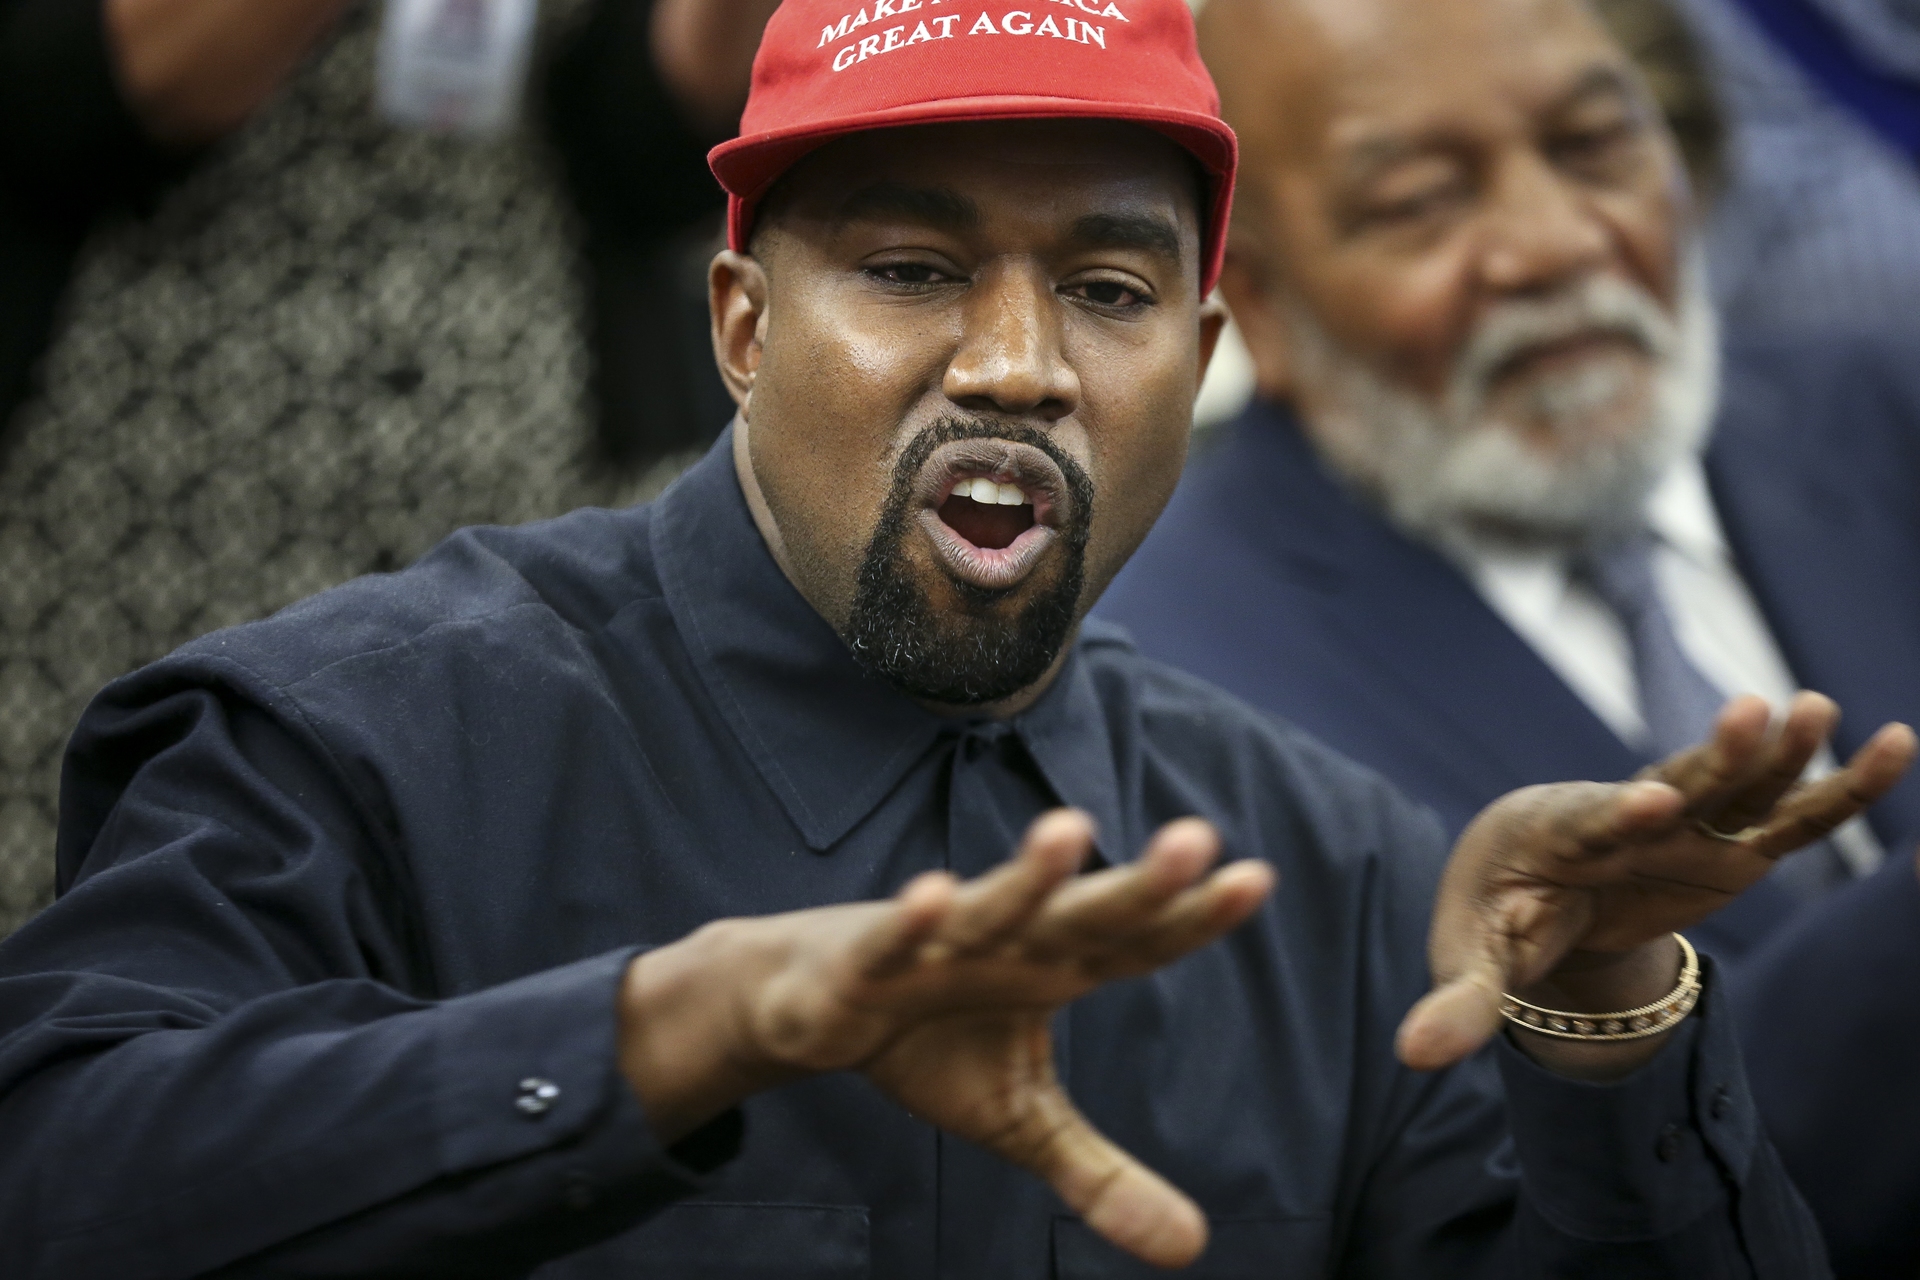 Kanye West drops off Forbes billionaires list after Adidas ends partnership  – with Spotify joining list of companies condemning him, Ents & Arts News